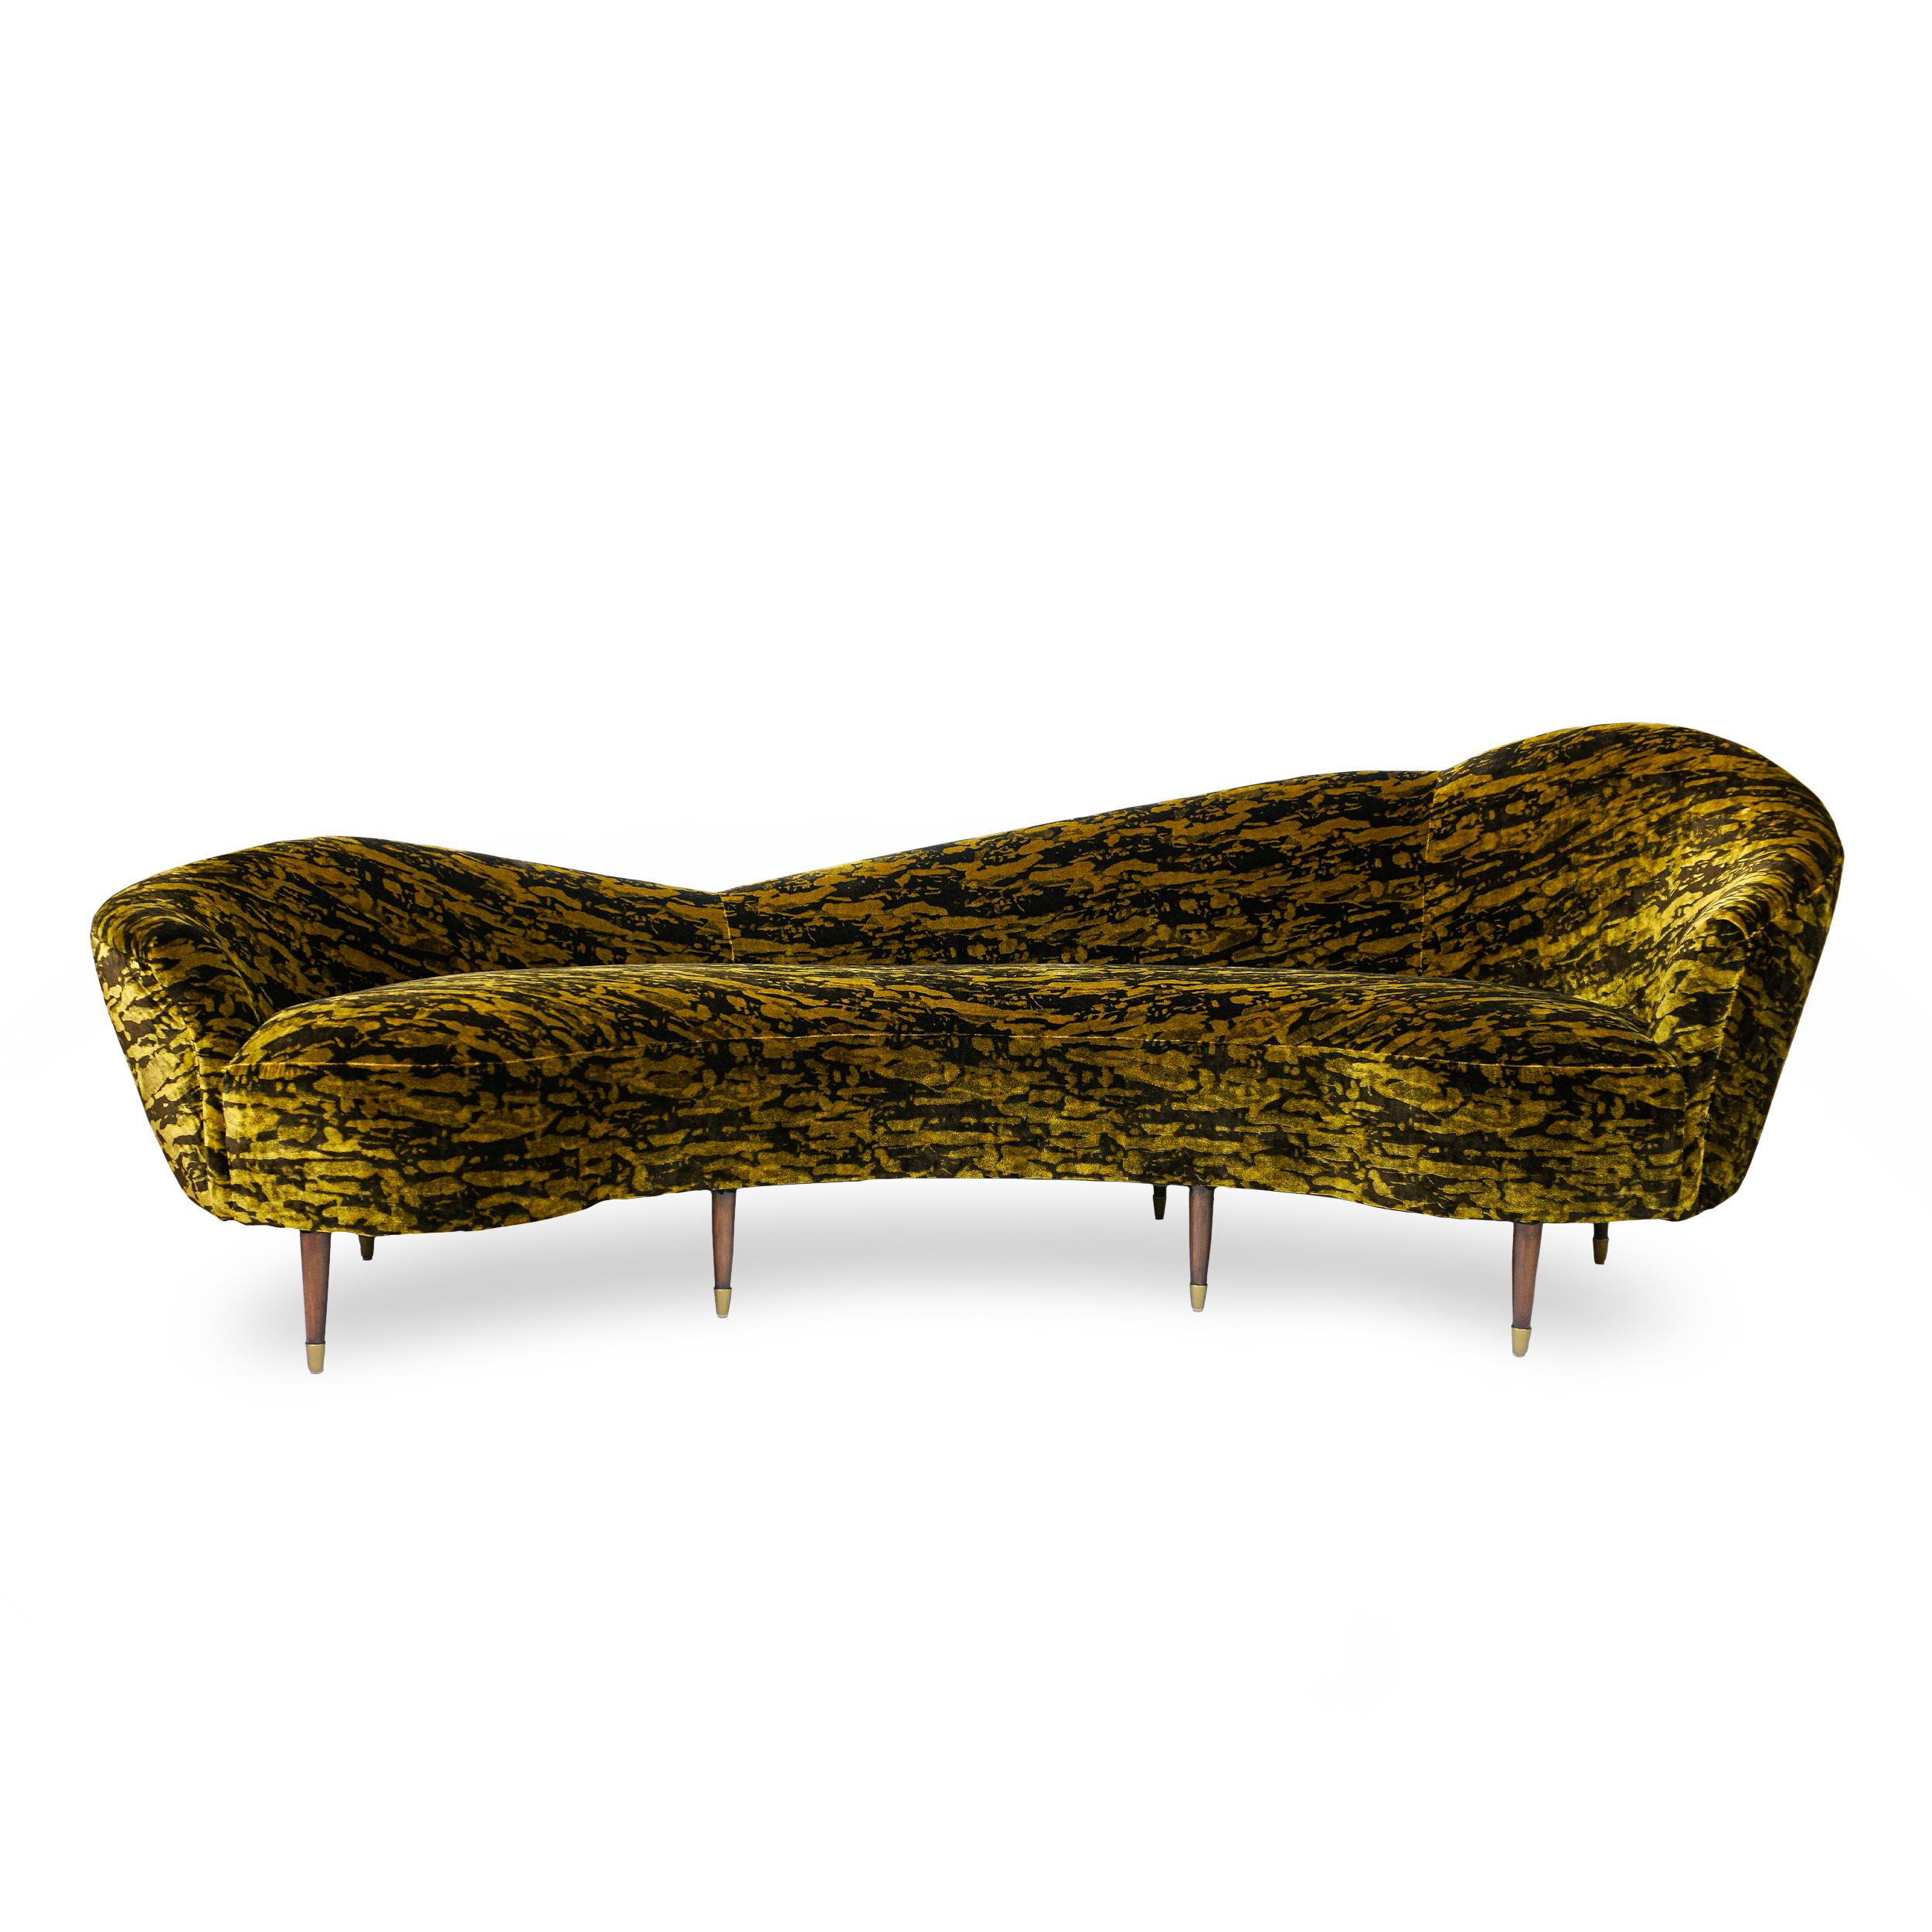 Sleek tight back sofa with sinuous curves. Silky tiger eye velvet covers a solid maple frame with a firm seat made with 8-way hand tied springs. Tapered legs are made in wenge with brass tips. Can be customized in size, fabric and wood finish. Ask